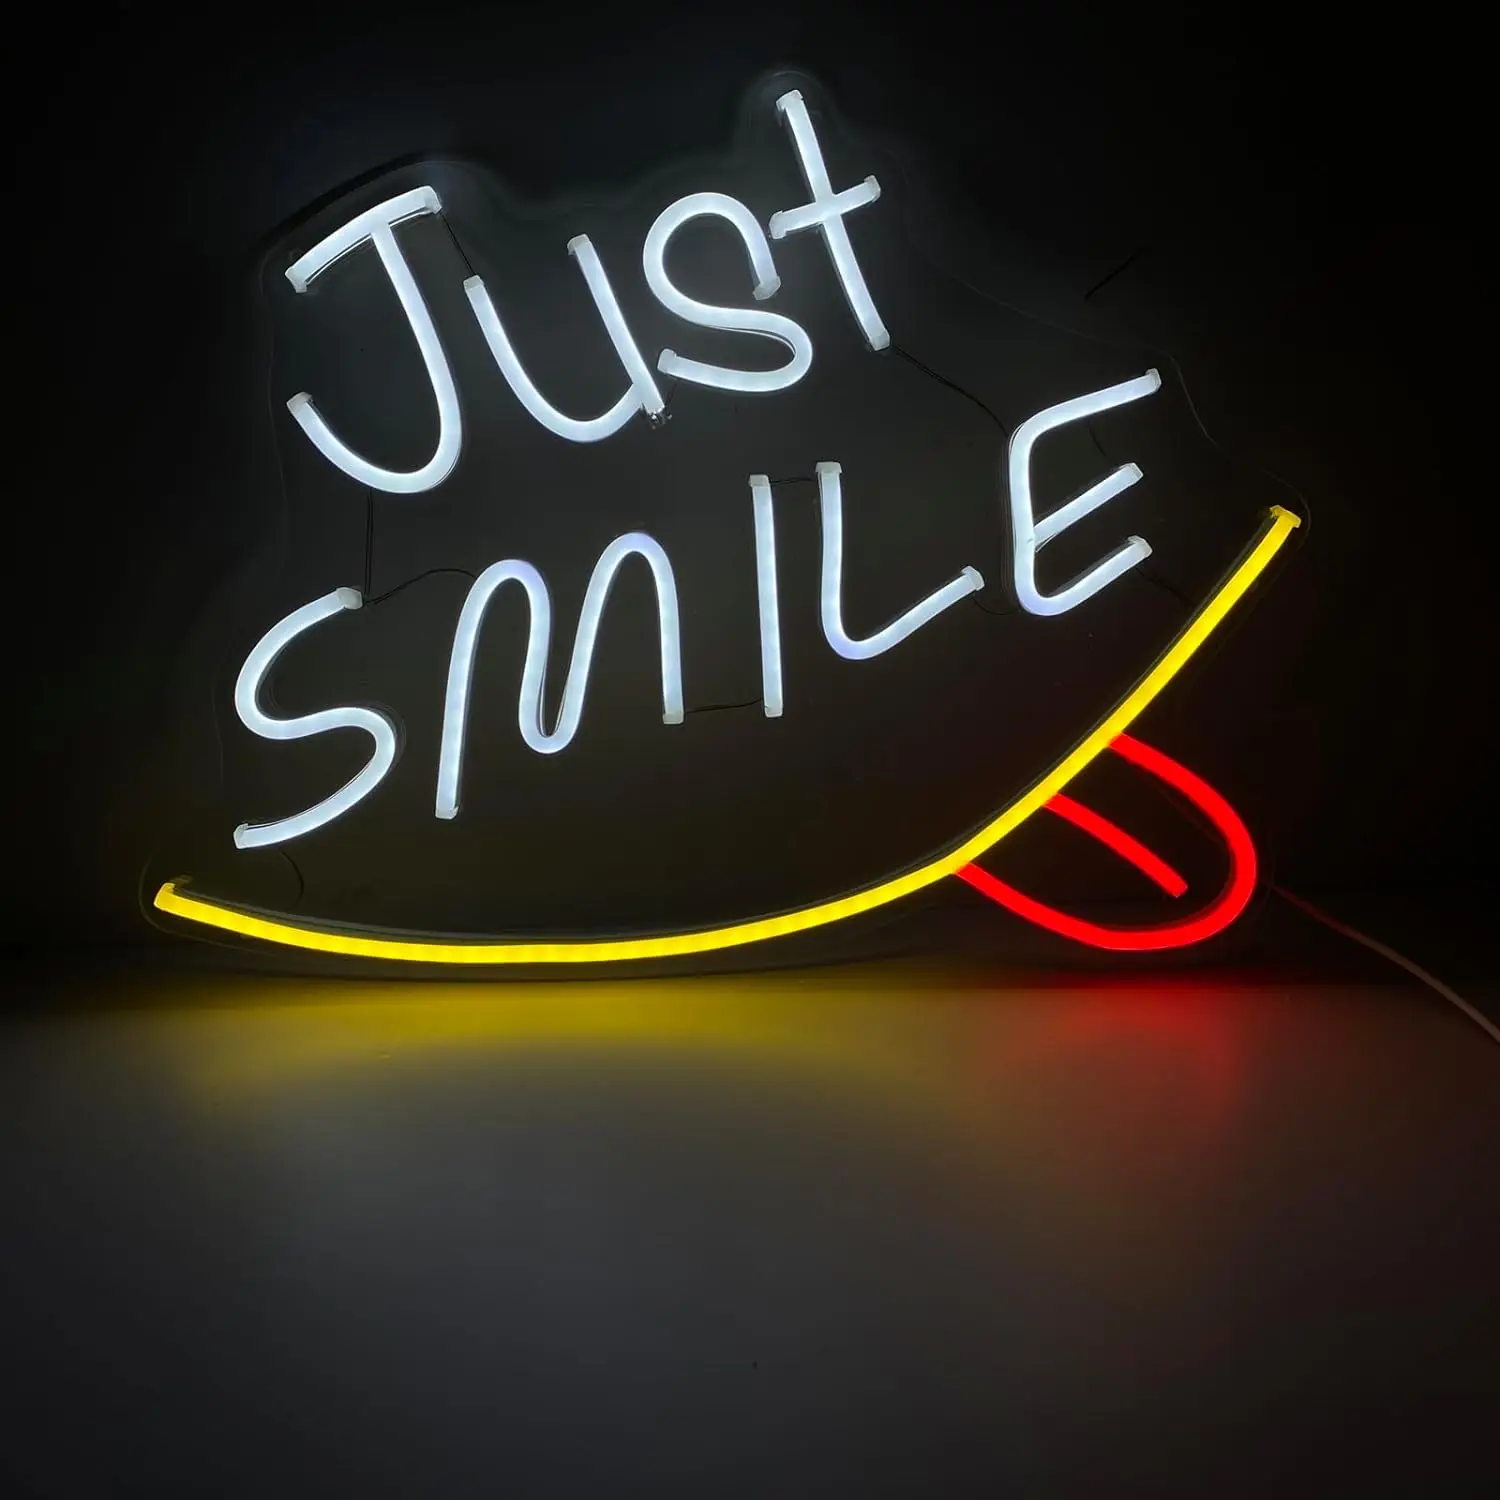 

Just Smile Neon Sign, USB LED Neon Signs for Wall Decor, Wedding, Engagement Party, Bedroom Decor, Party Decoration, Birthday